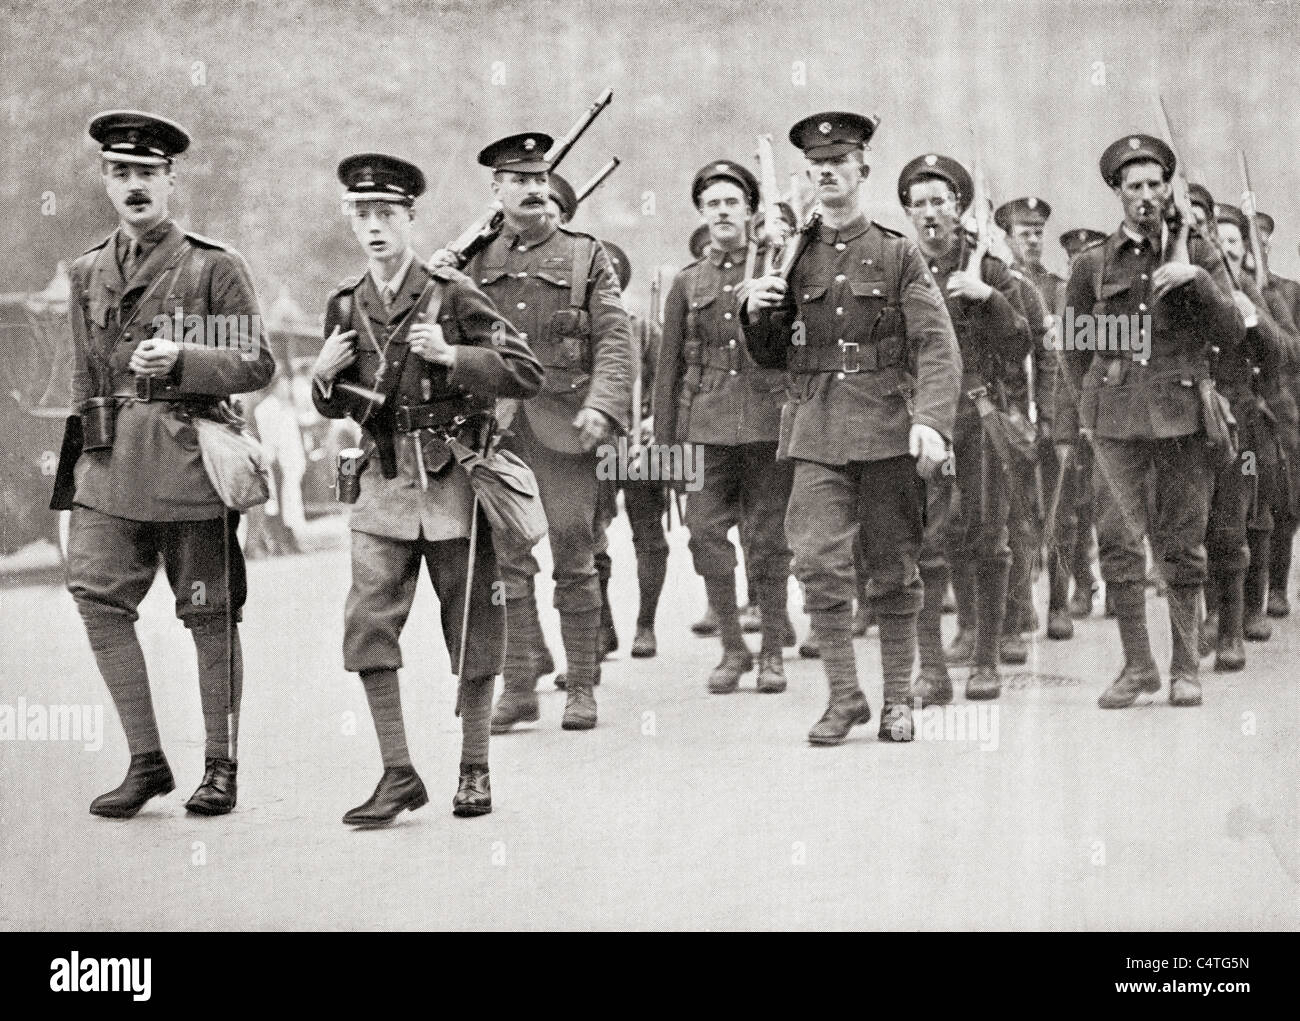 The Prince of Wales, later King Edward VIII, second from left, leading his company of Grenadier Guards in full service kit. Stock Photo